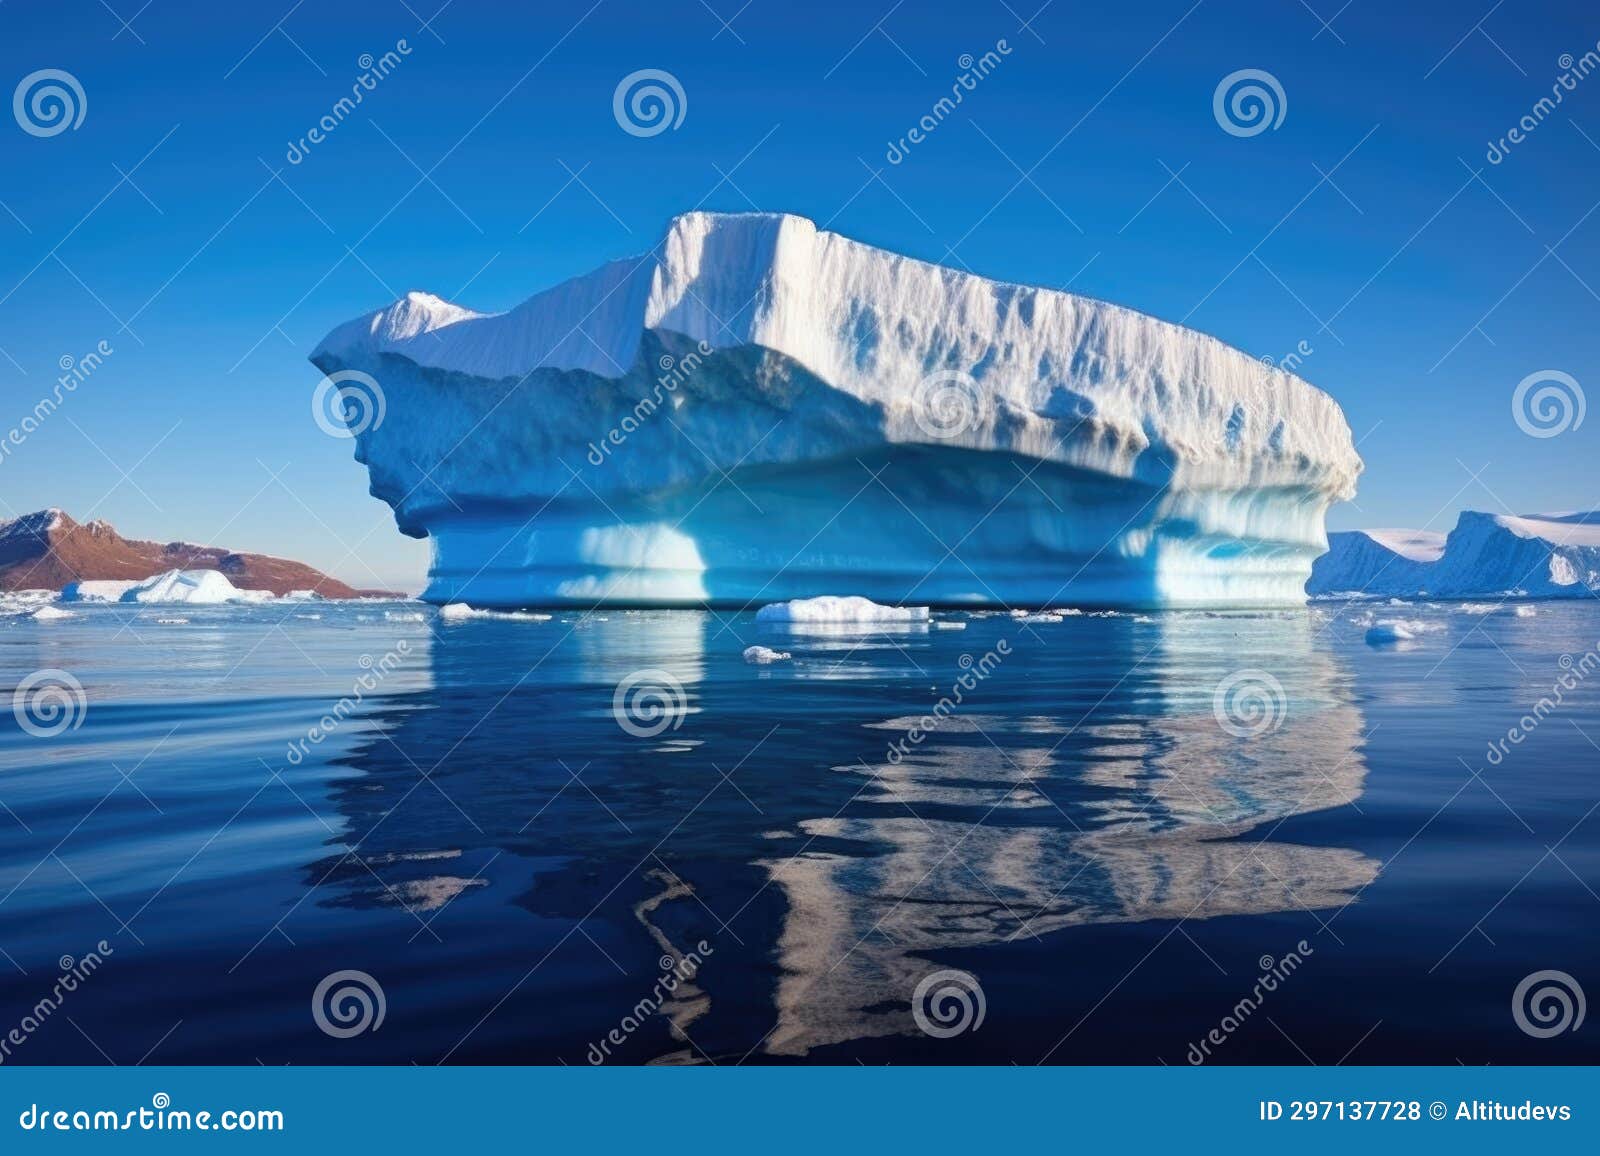 Dome-shaped Iceberg Glowing in the Daylight Stock Photo - Image of ...